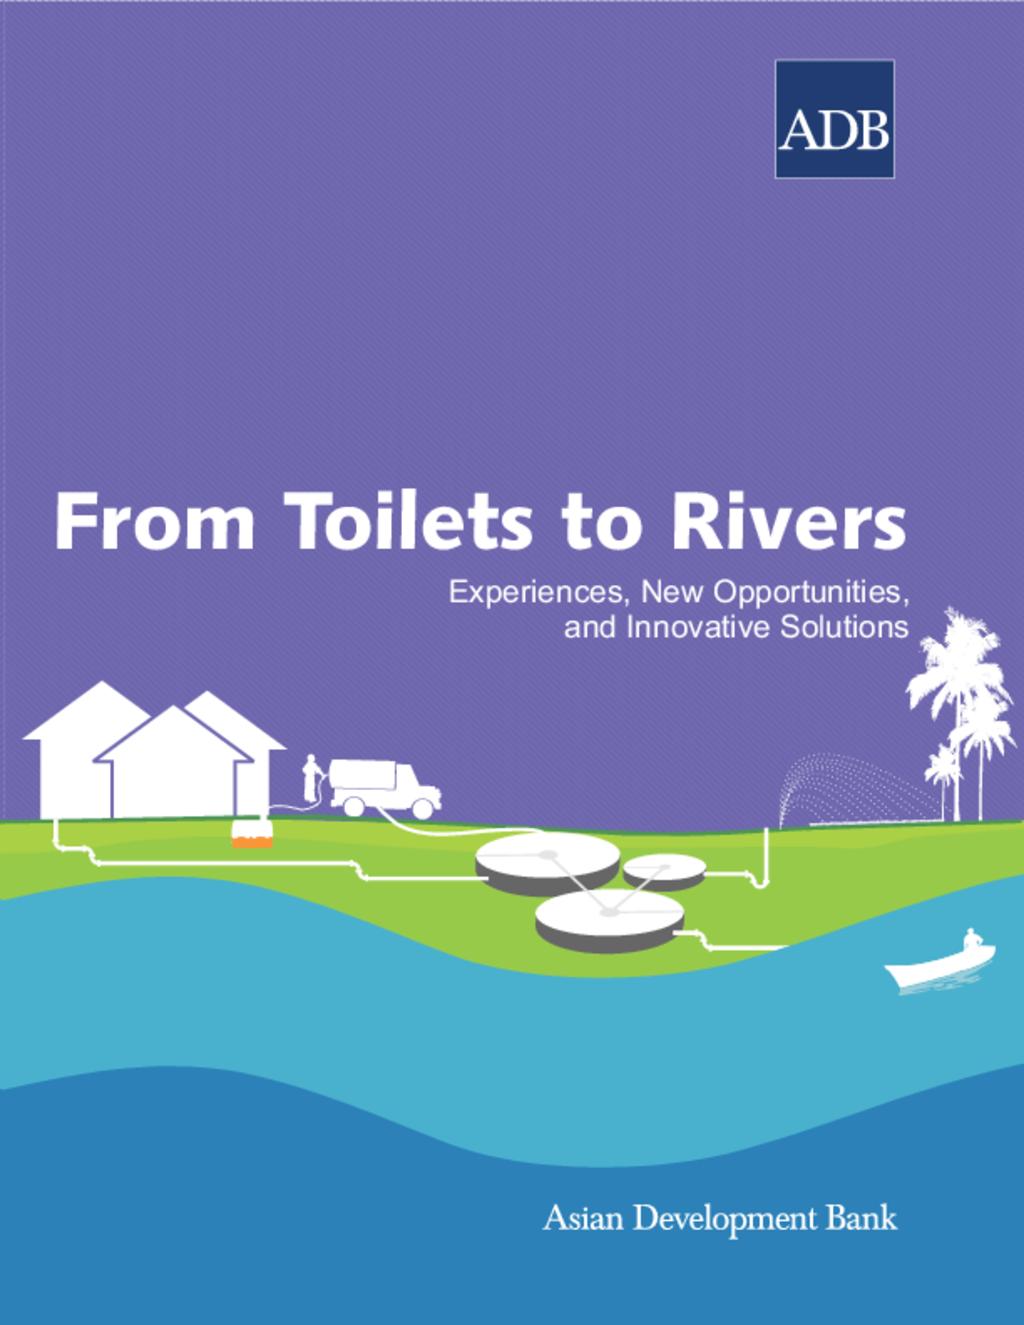 From Toilets to Rivers: Experiences, New Opportunities and Innovative Solutions